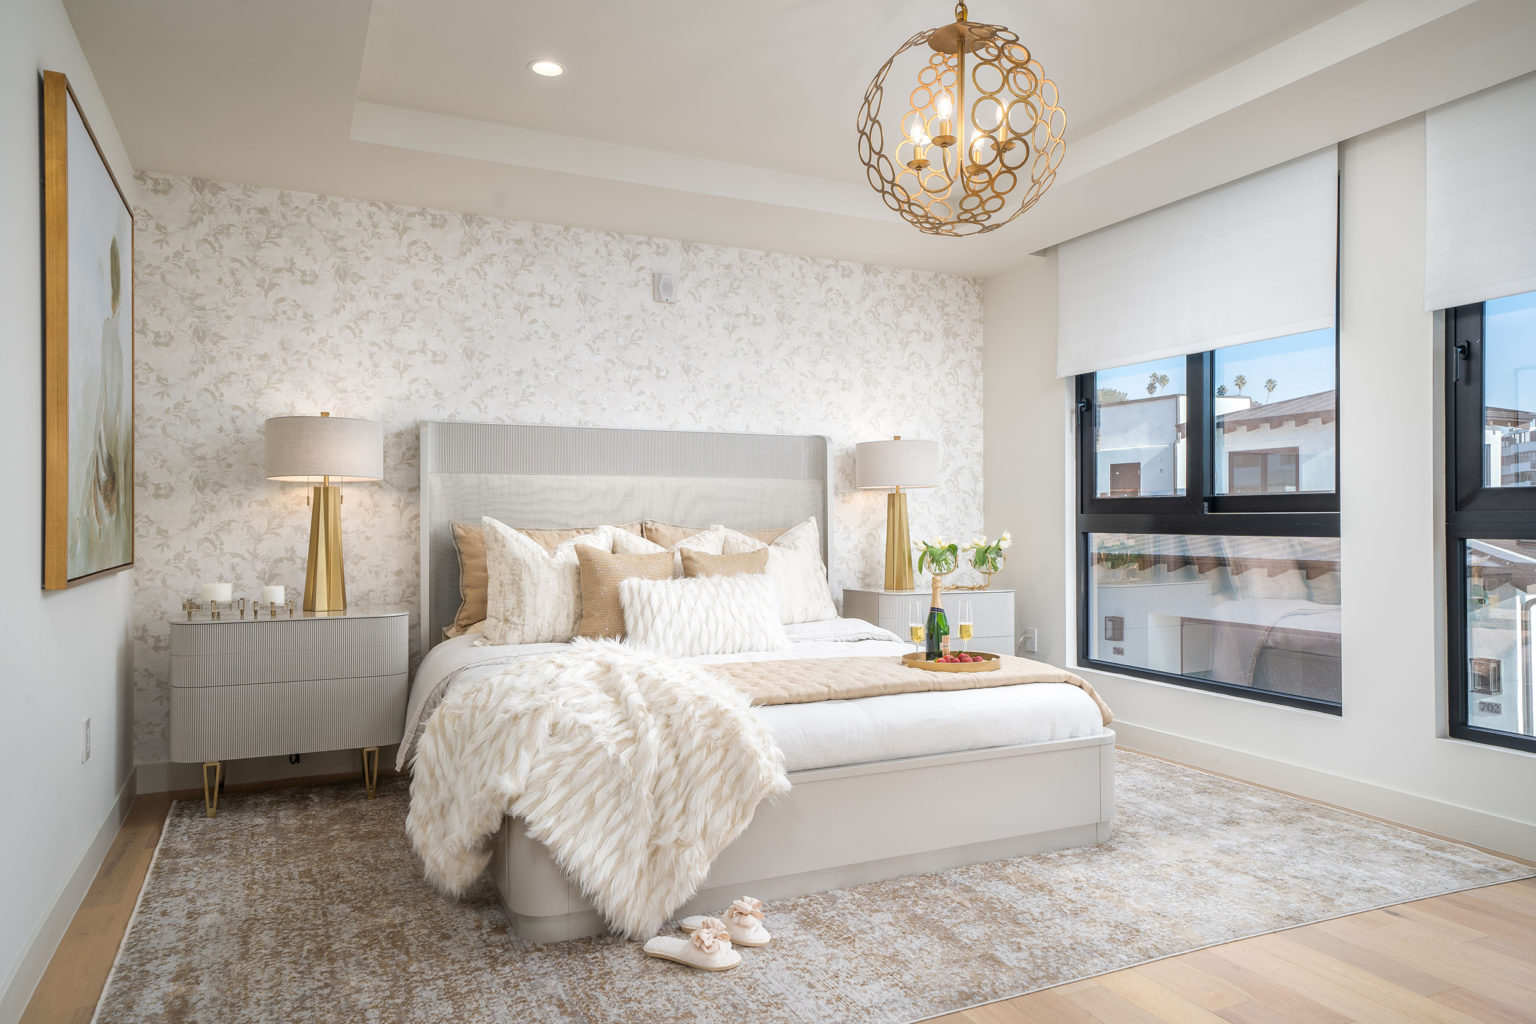 Bedroom with white and tan bedding